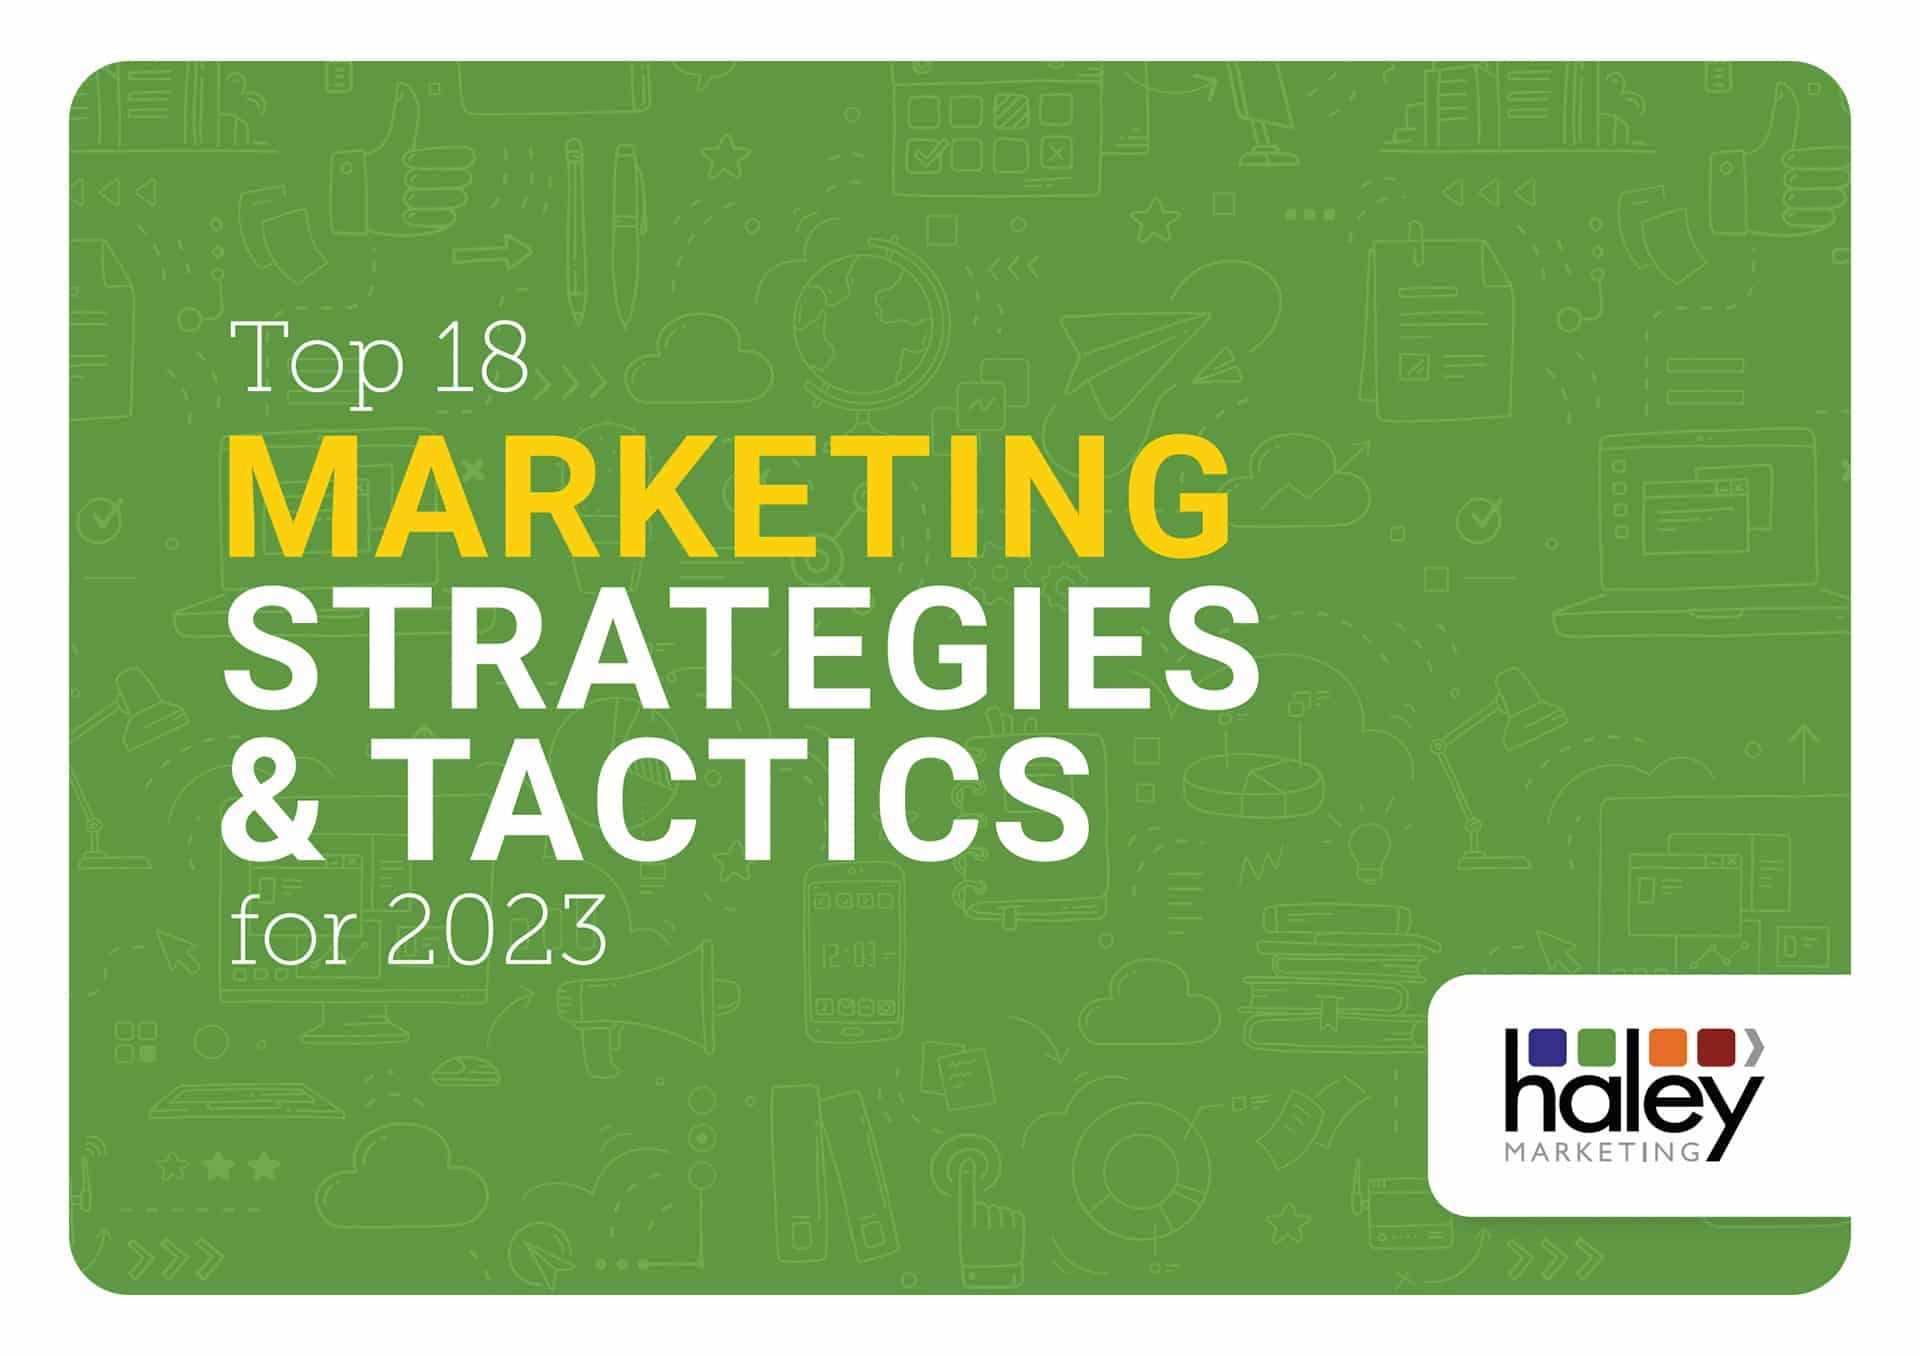 Top 18 Marketing Strategies and Tactics for 2023